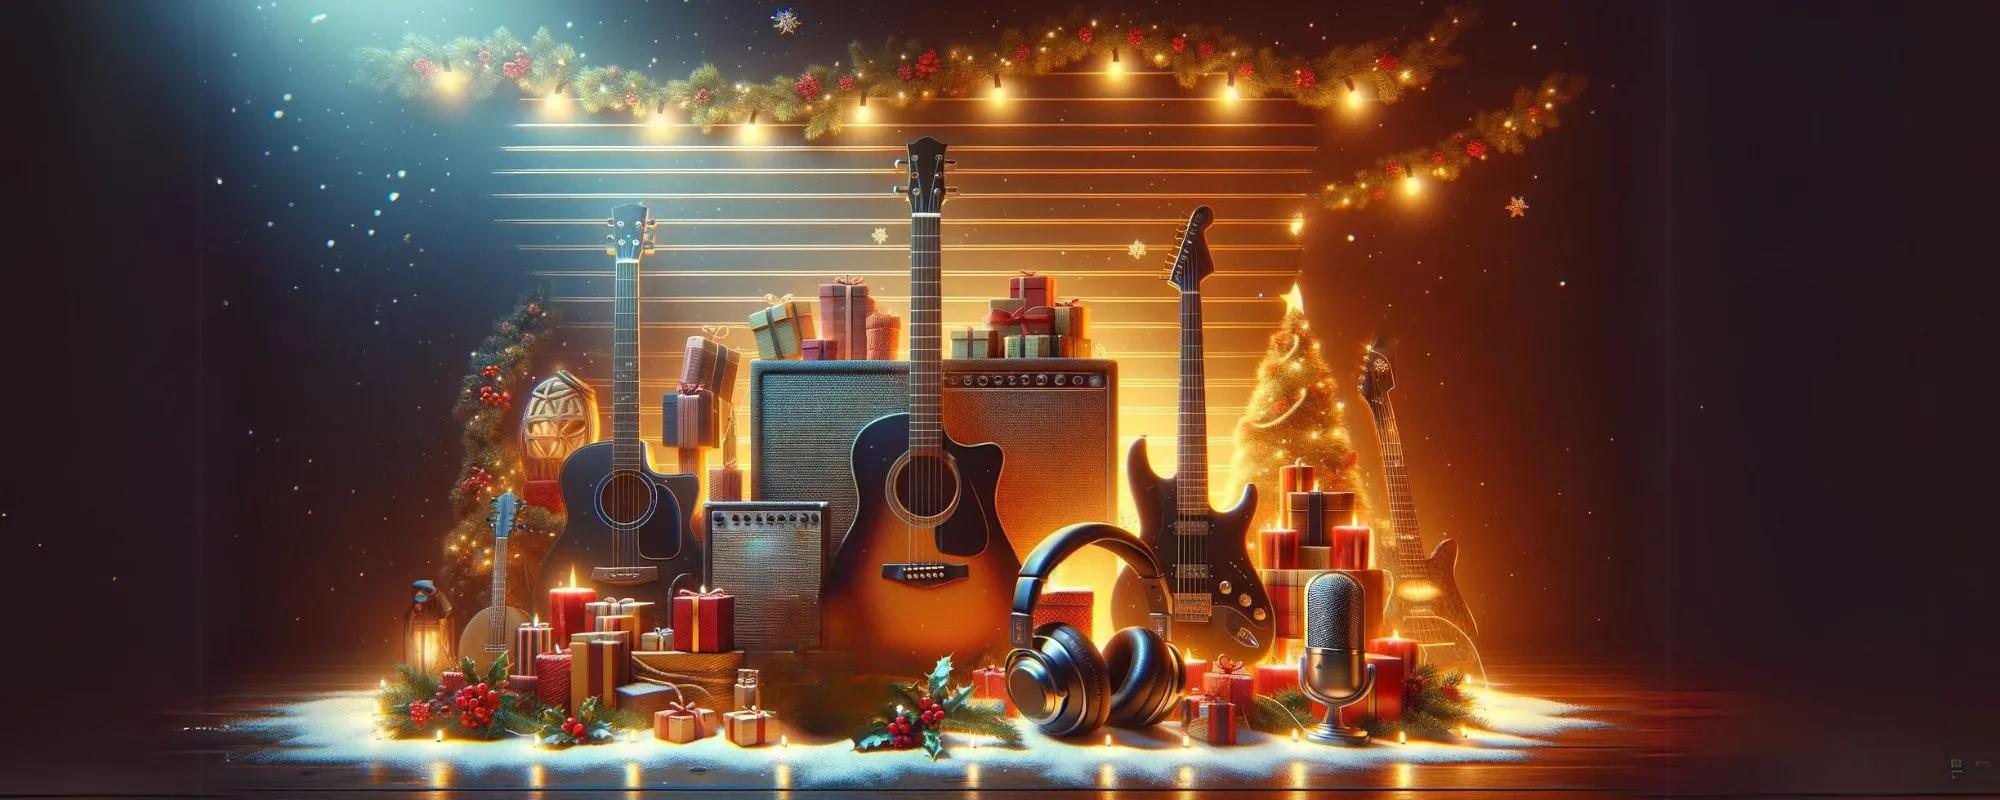 25 Best Gifts for Musicians: Perfect Stocking Stuffers for Music Lovers